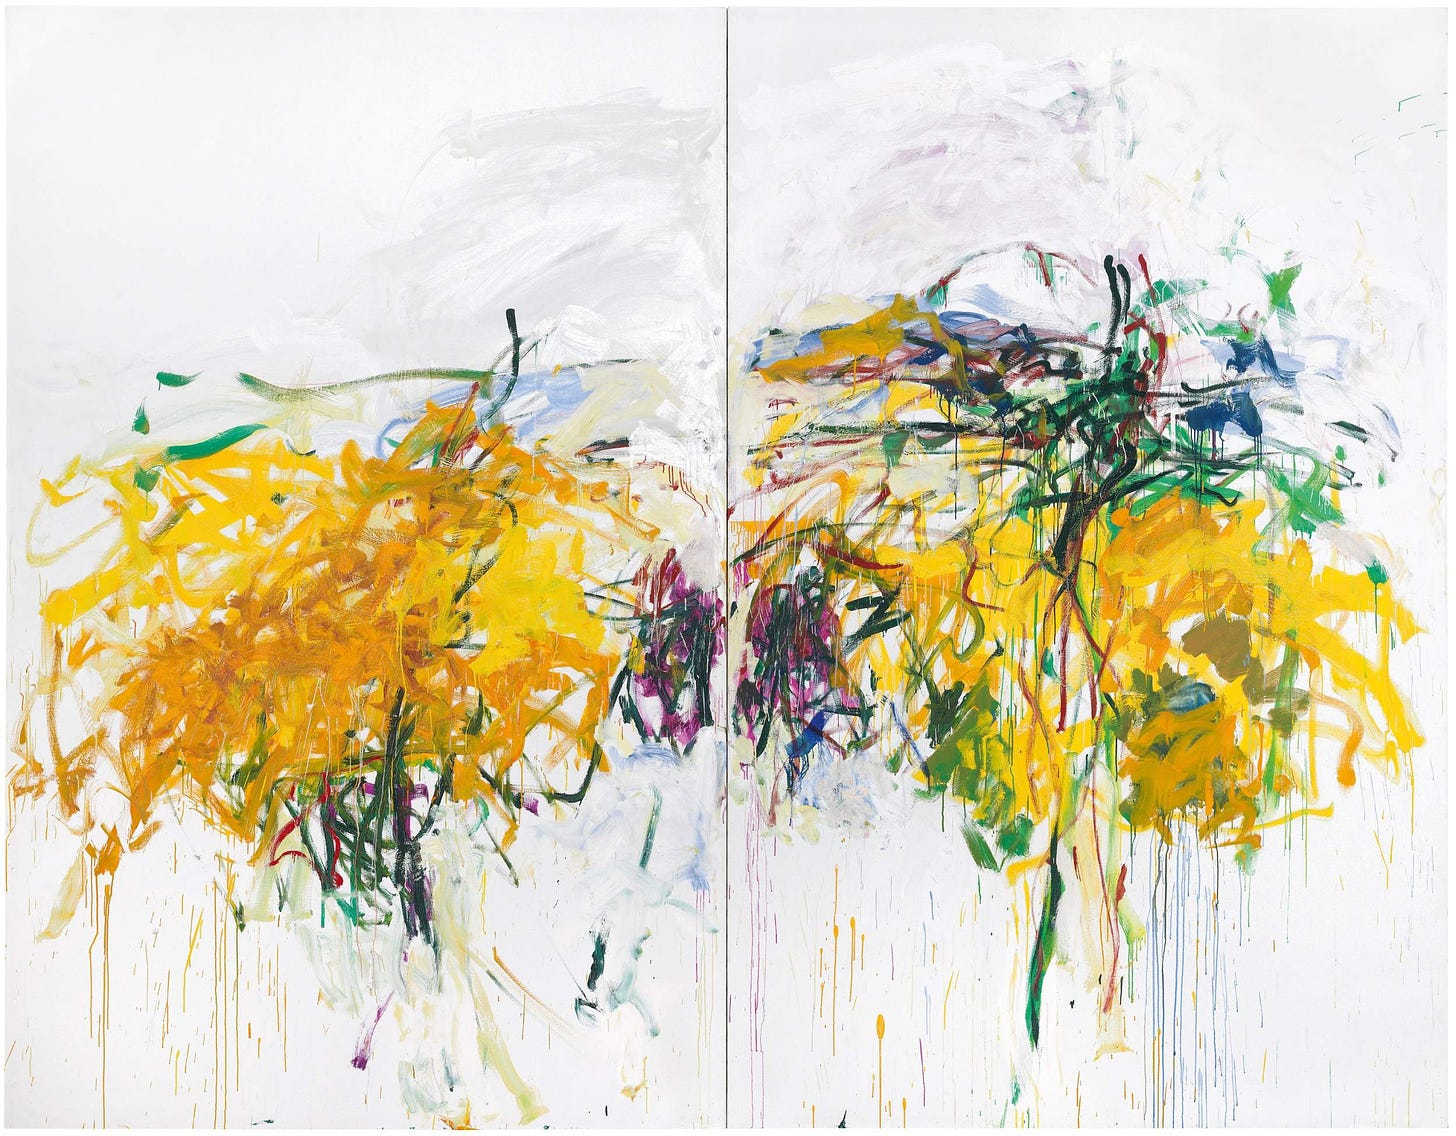 Untitled, 1992, abstract painting on 2 canvases by artist Joan Mitchell